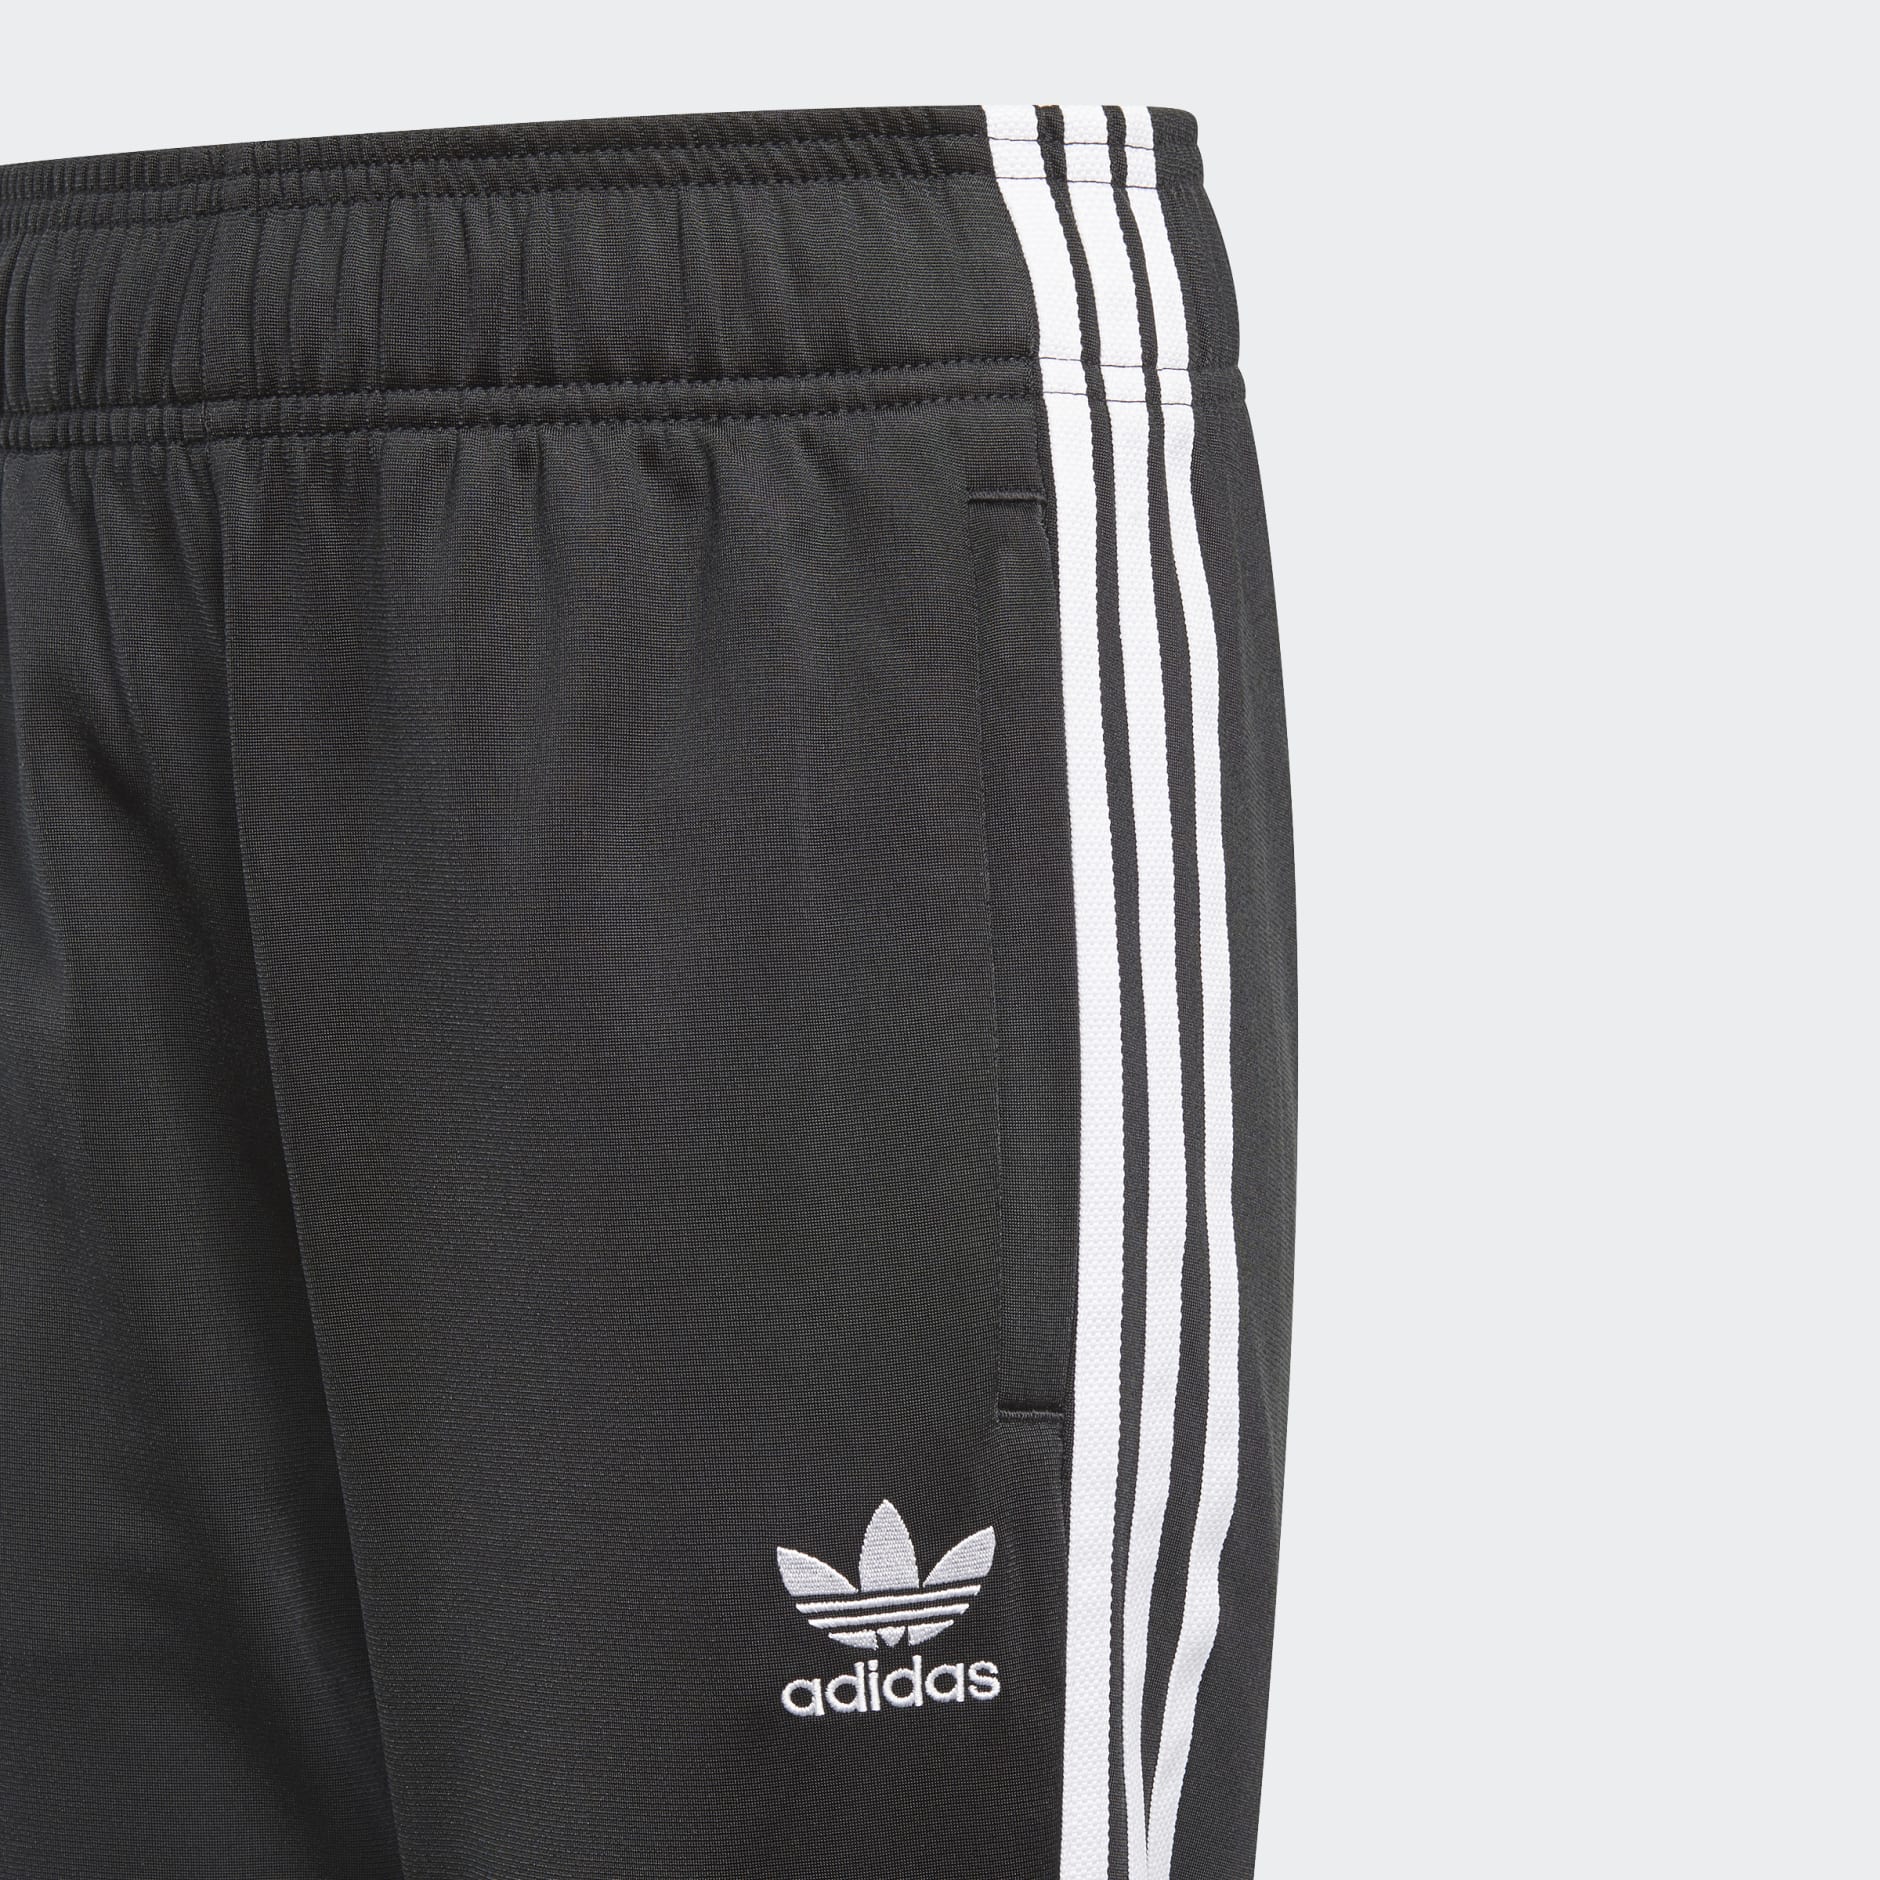 Clothing - Adicolor SST Track Pants - Black | adidas South Africa